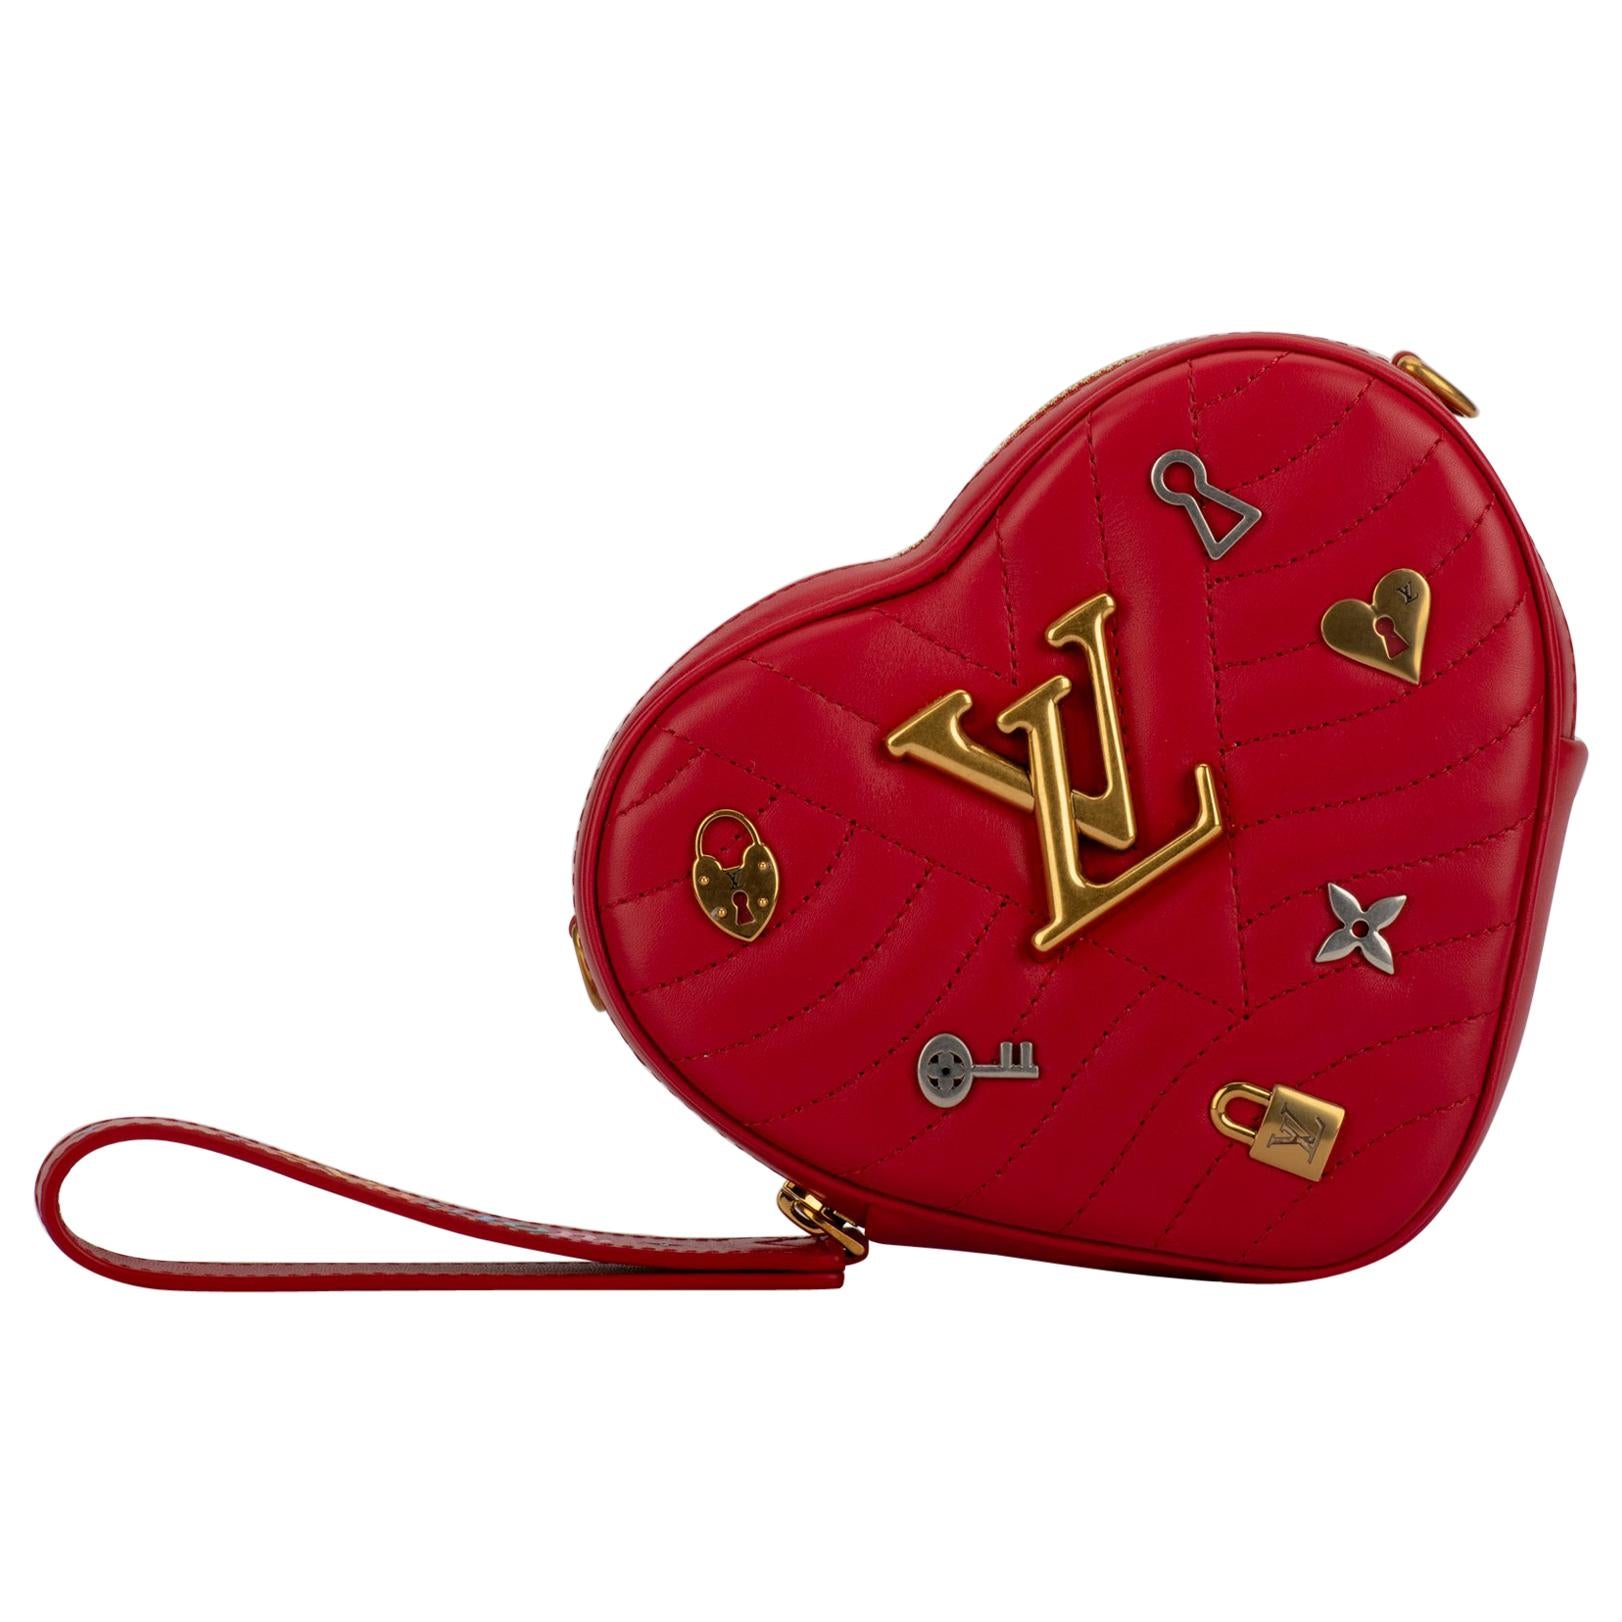 New in Box Vuitton Limited Edition Red Heart Charm Handbag Clutch Belt Bag For Sale